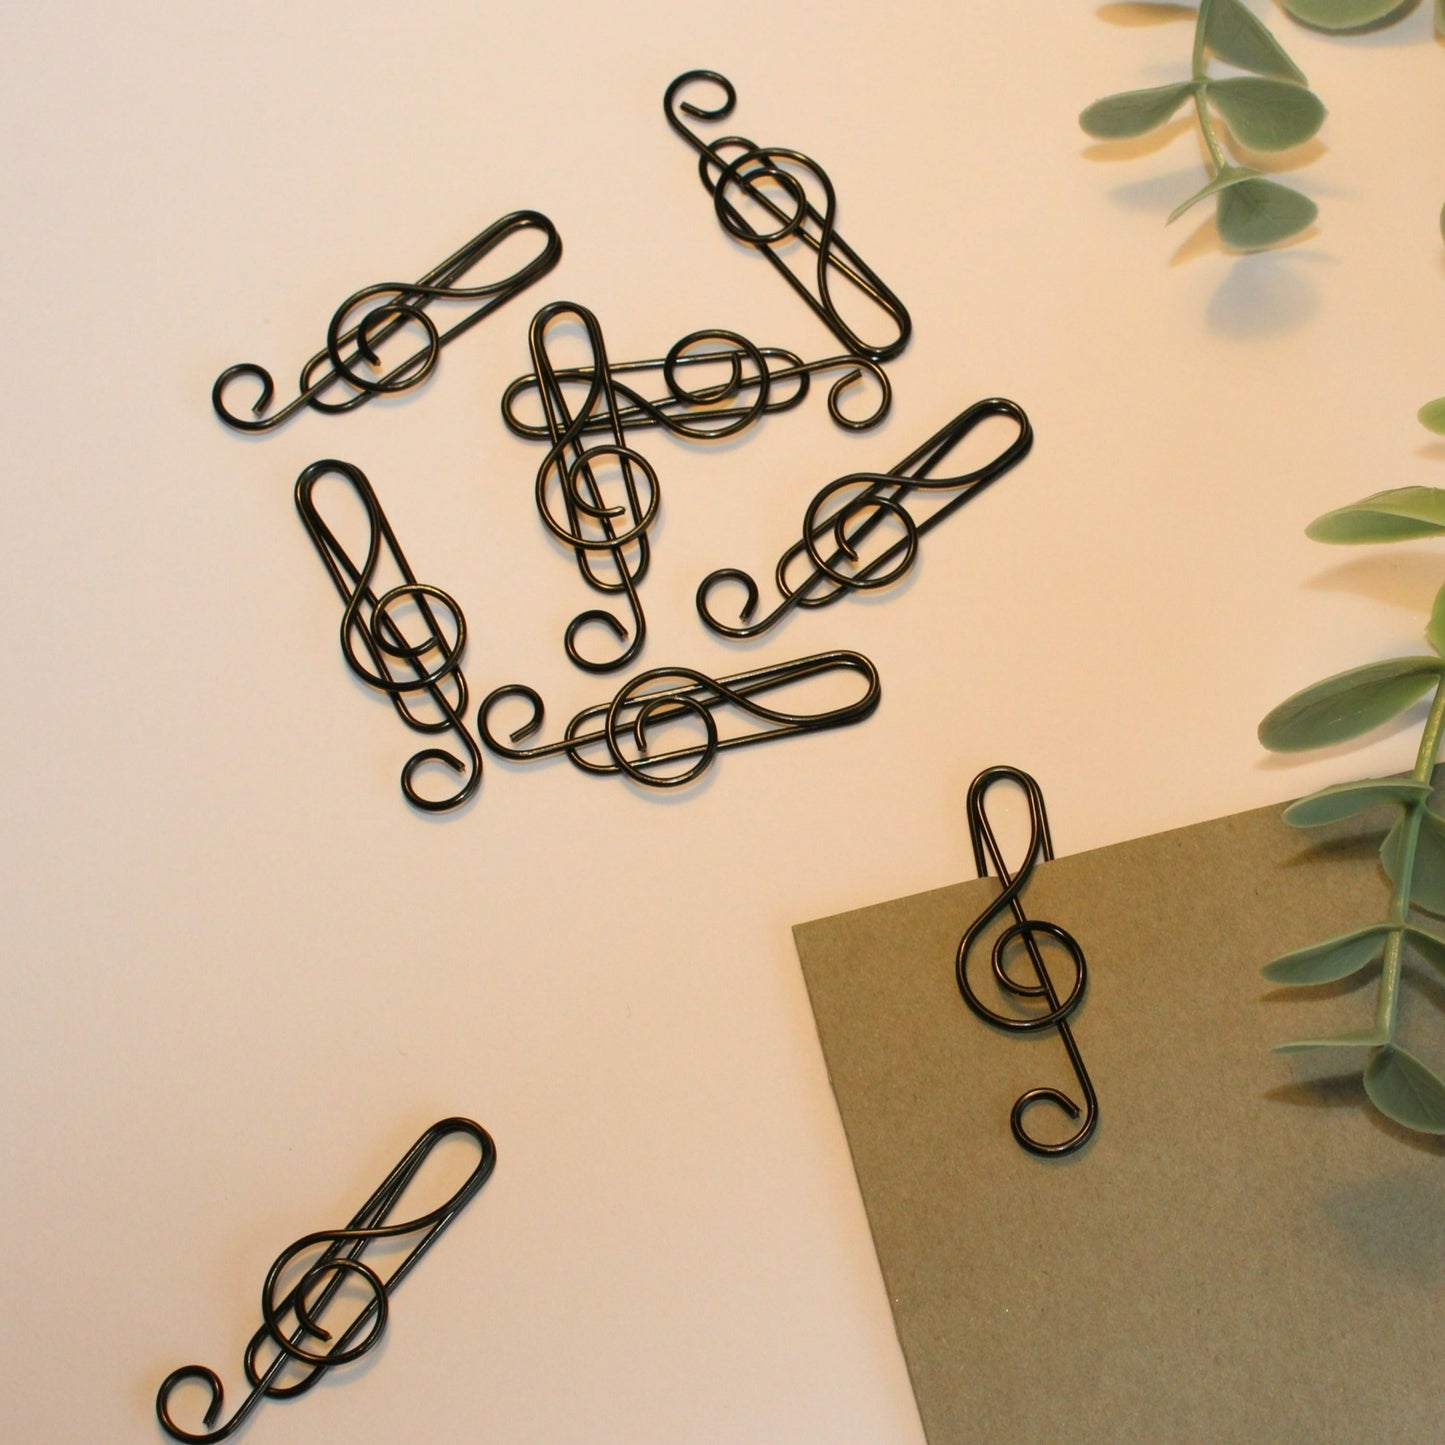 Several black treble clef paperclips. Green foliage and grey card on a white background.